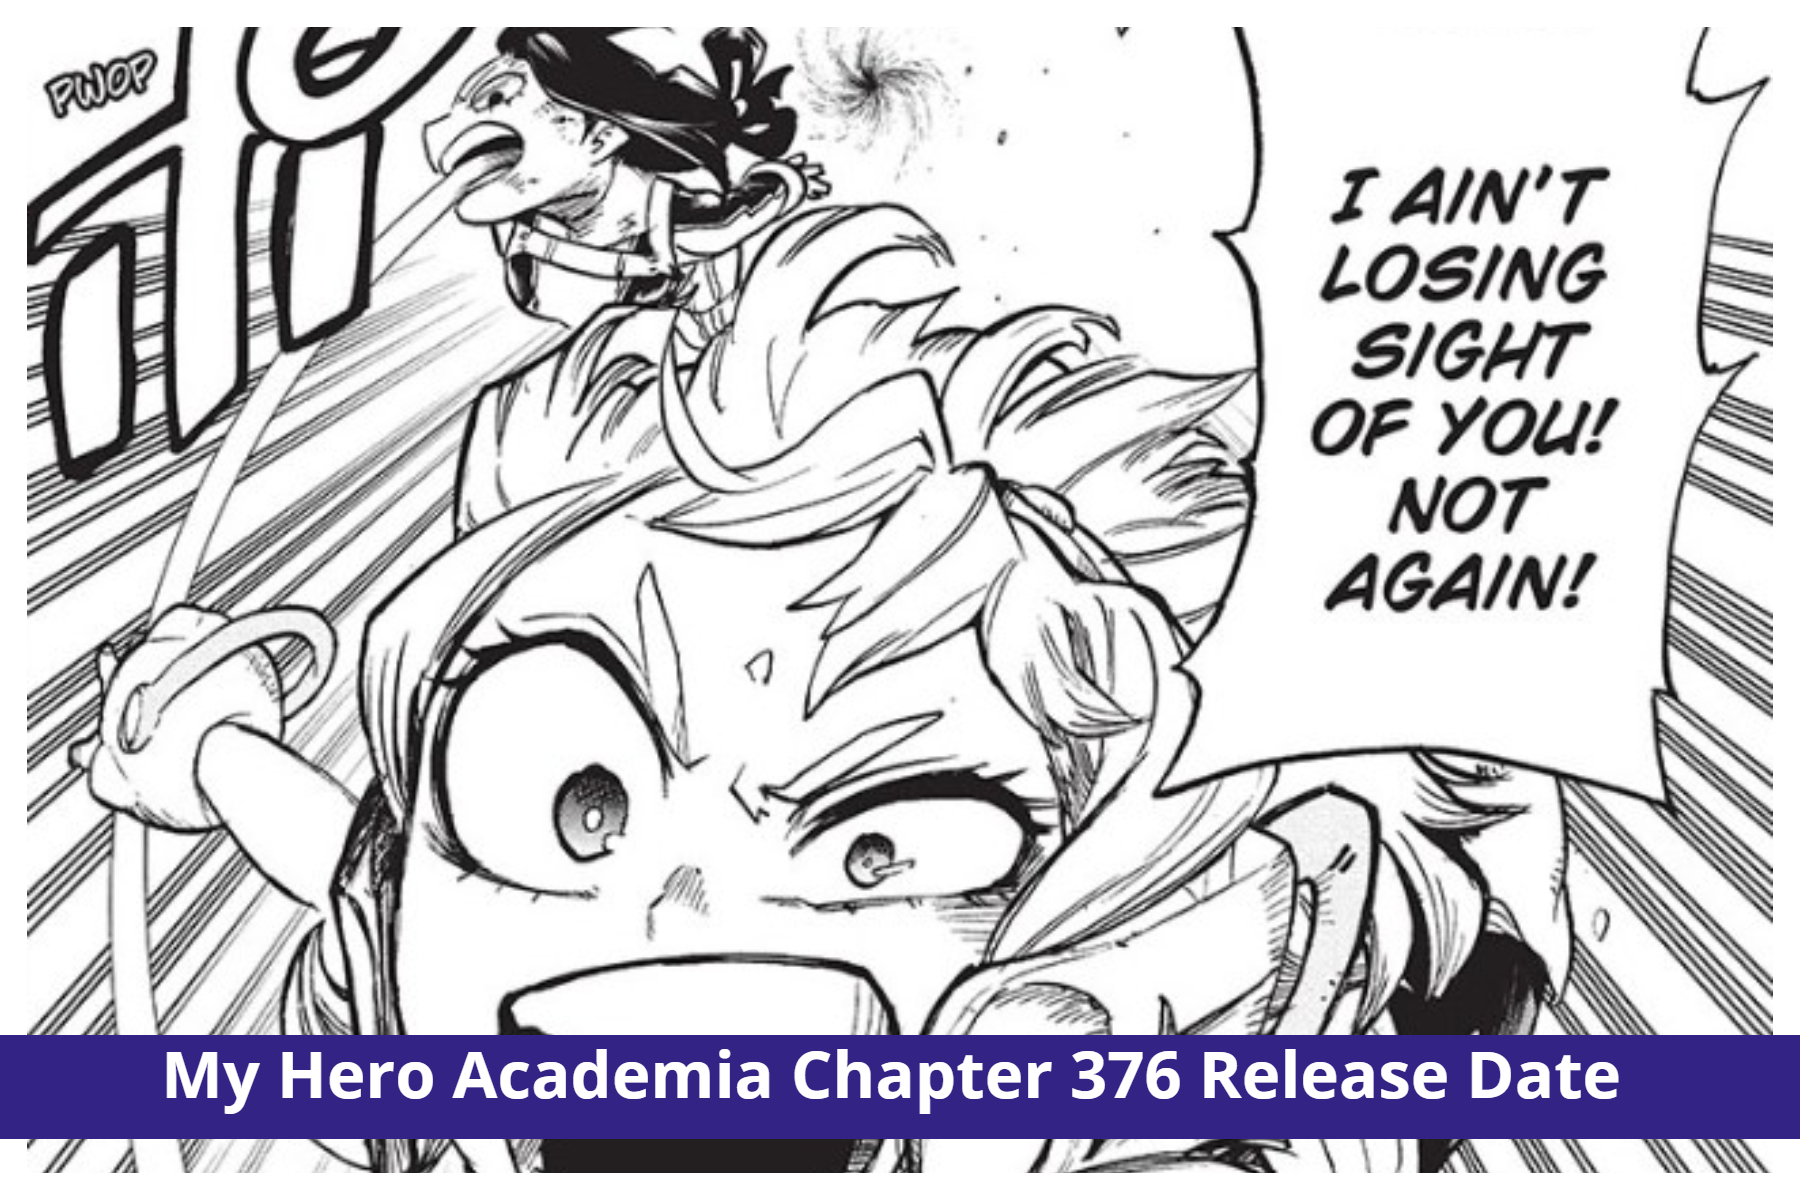 My Hero Academia Chapter 376: Villains Loss! Release Date & Plot